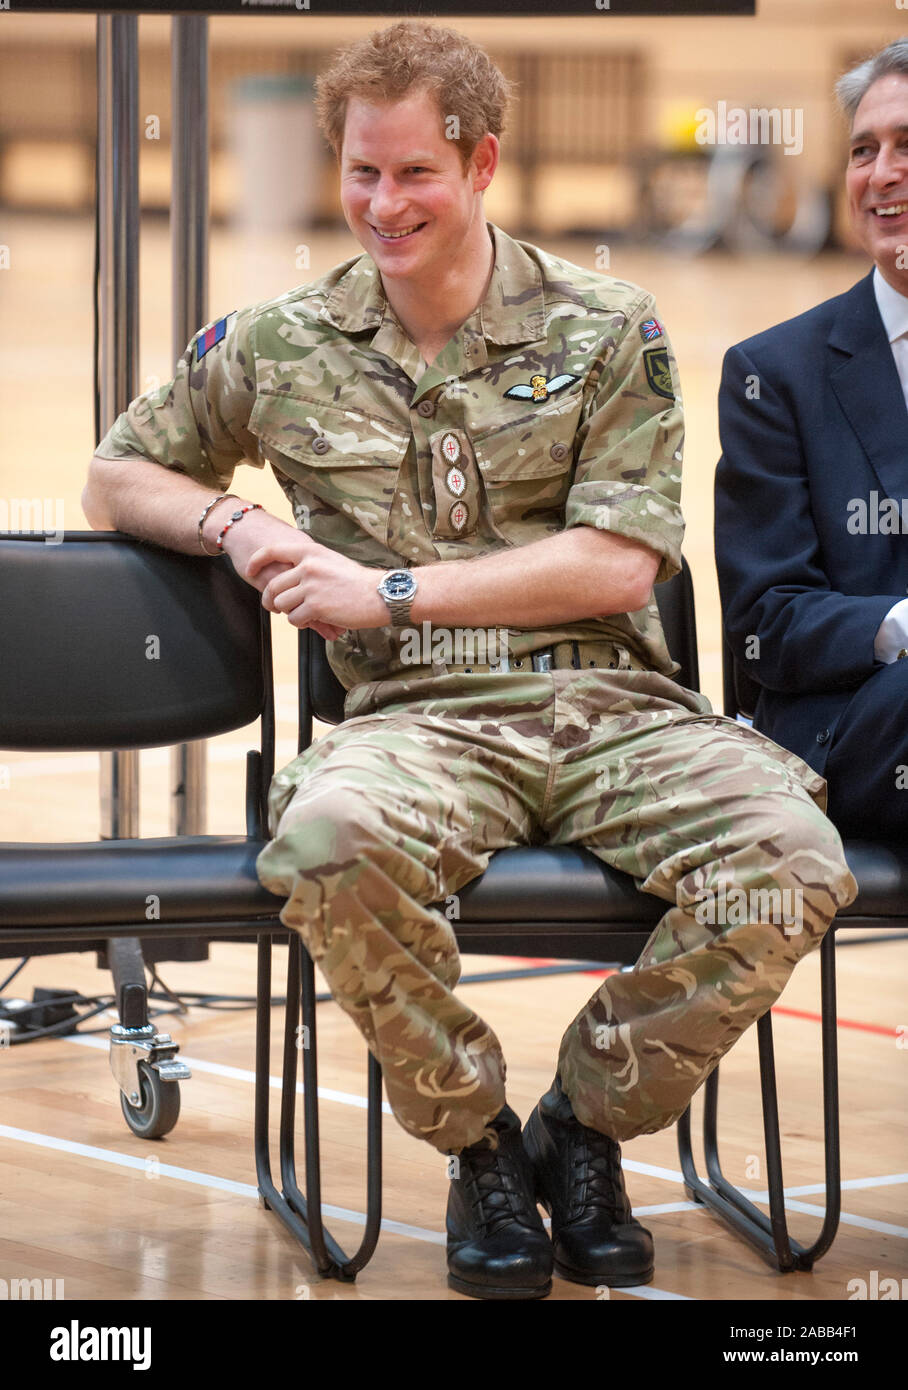 Prince Harry launching the Invictus Games, an International sporting event for wounded, injured and sick service personnel in the Copperbox at the Queen Elizabeth Olympic park.March 2014 Stock Photo